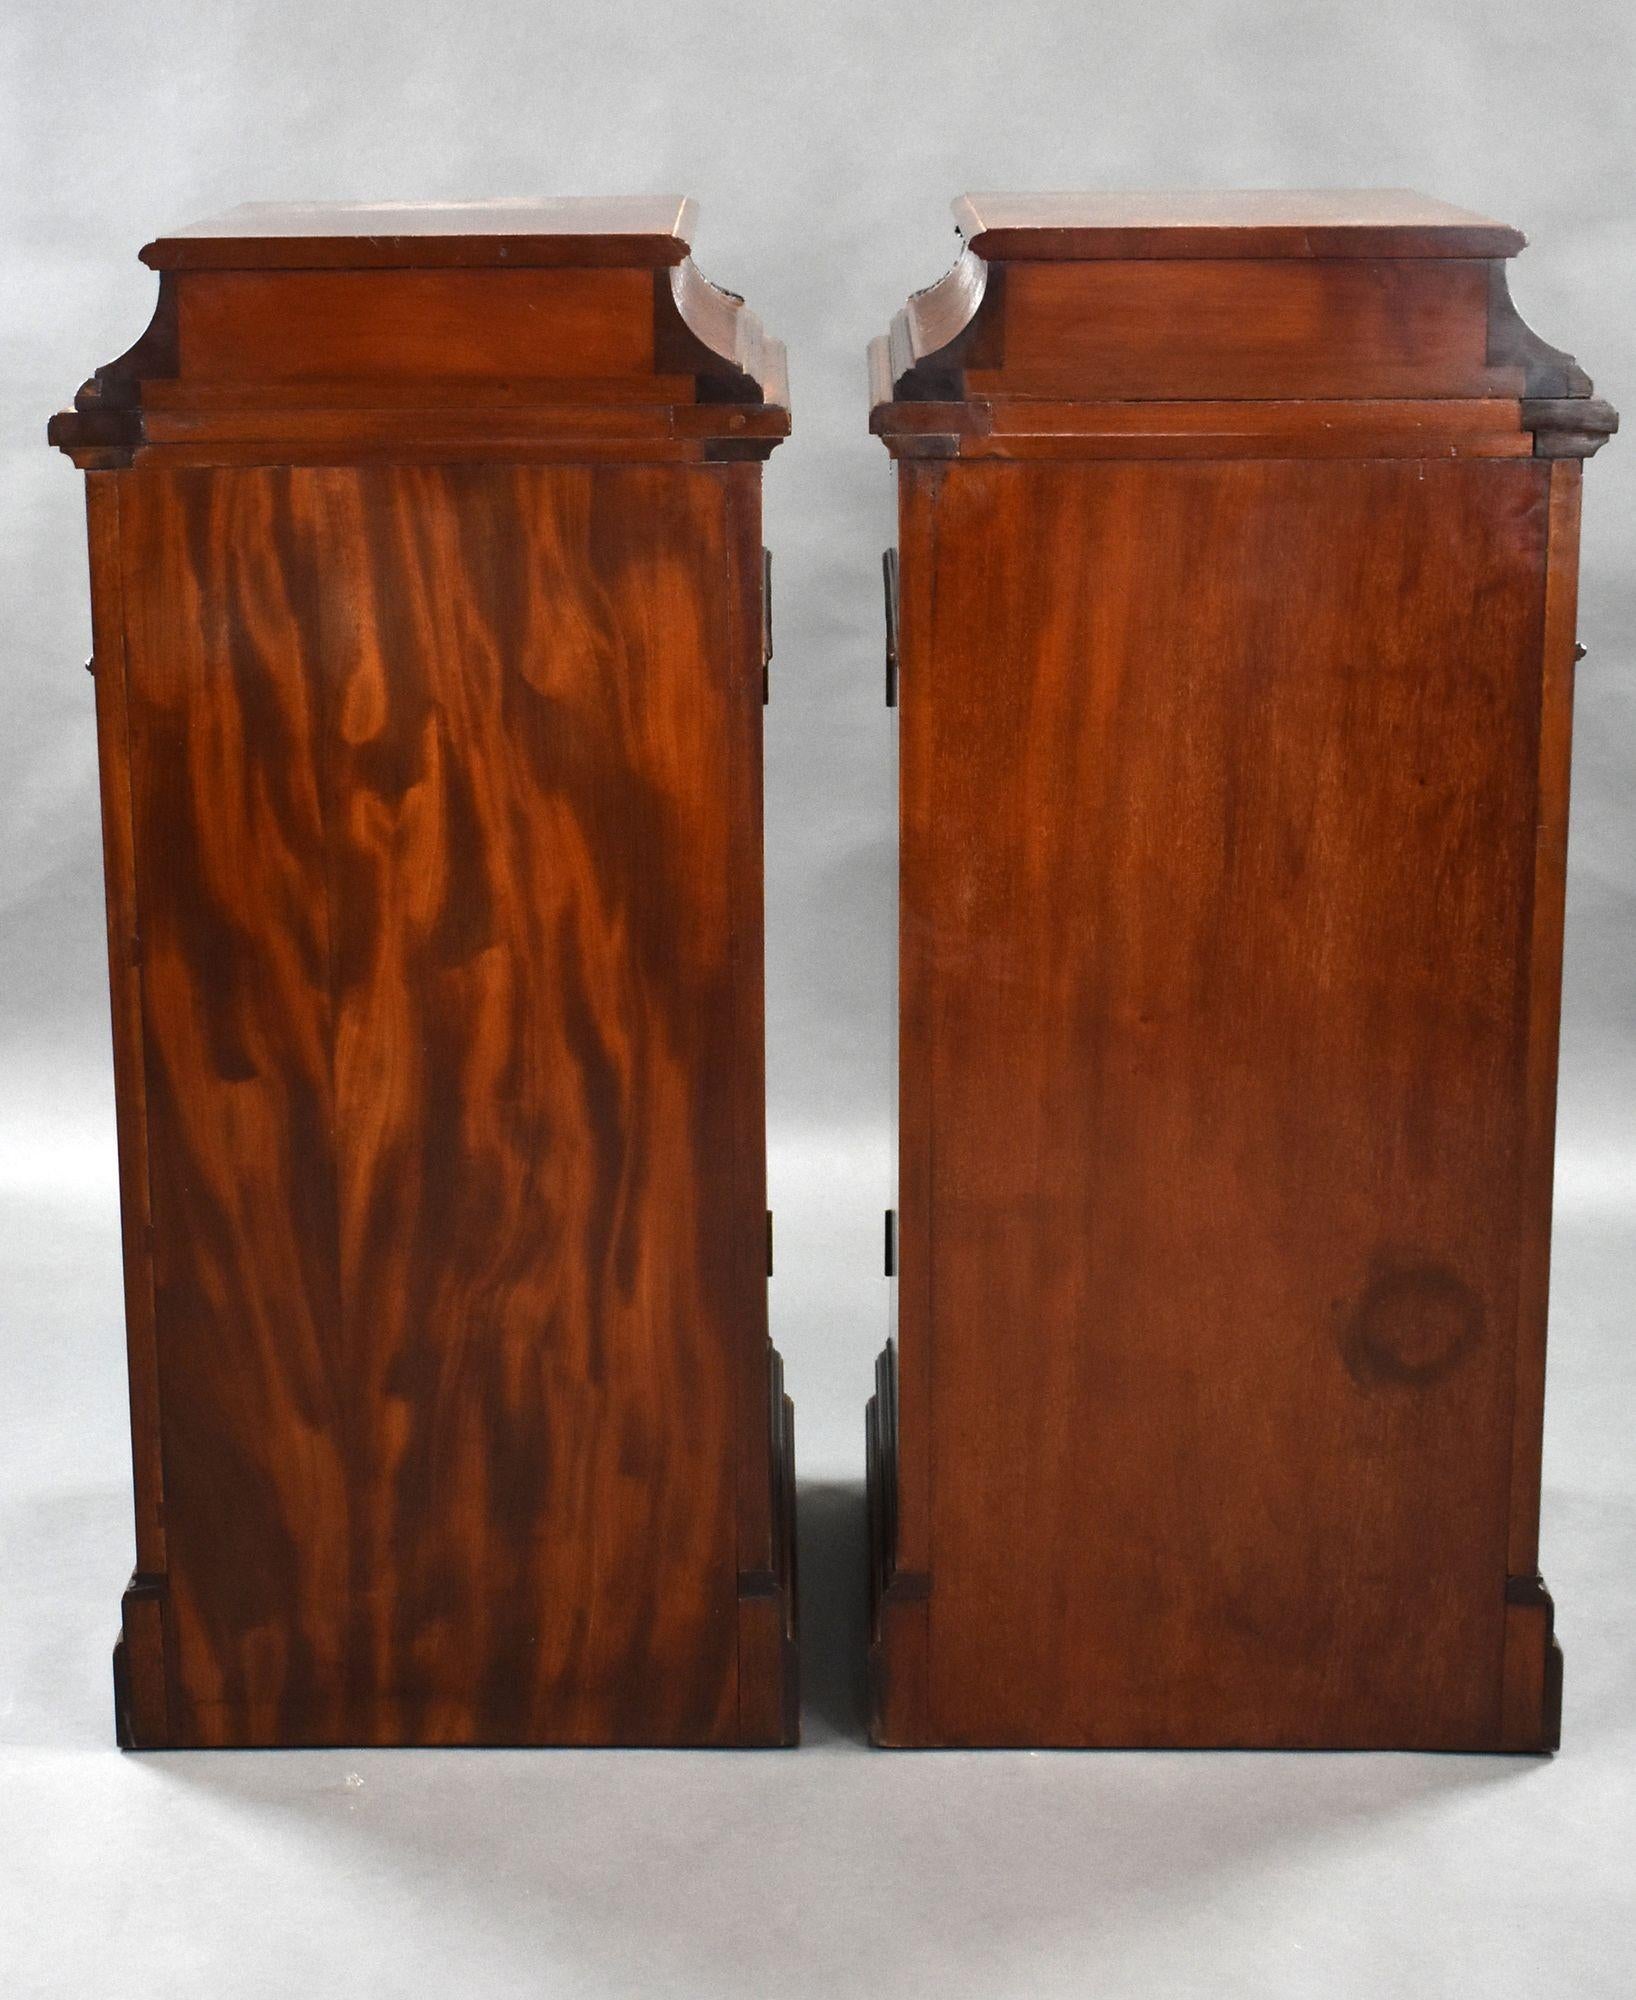 Pair of 19th Century Solid Mahogany Pedestals In Good Condition For Sale In Chelmsford, Essex